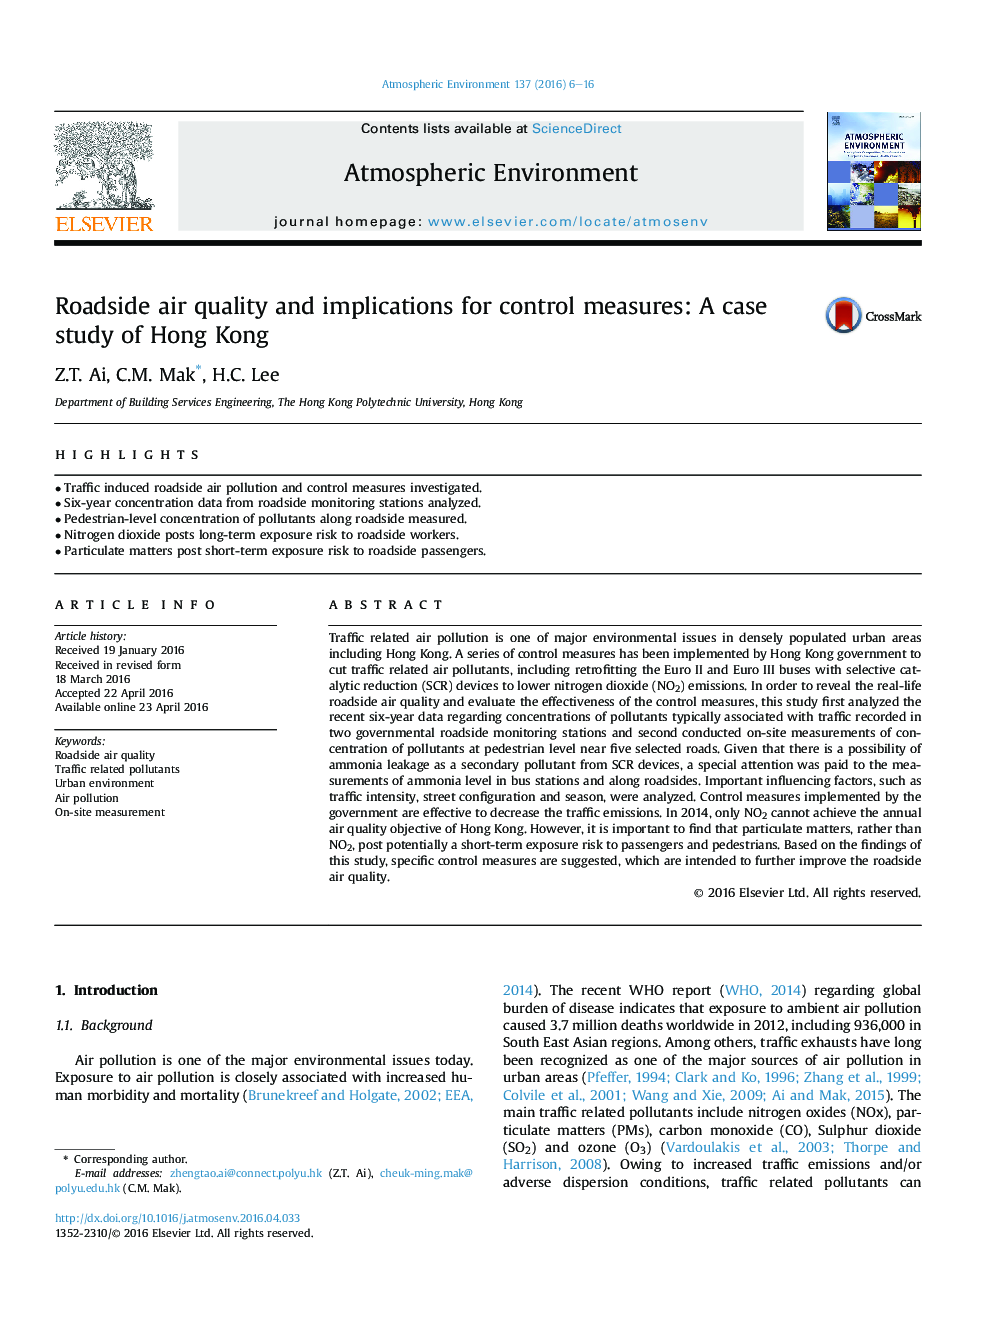 Roadside air quality and implications for control measures: A case study of Hong Kong